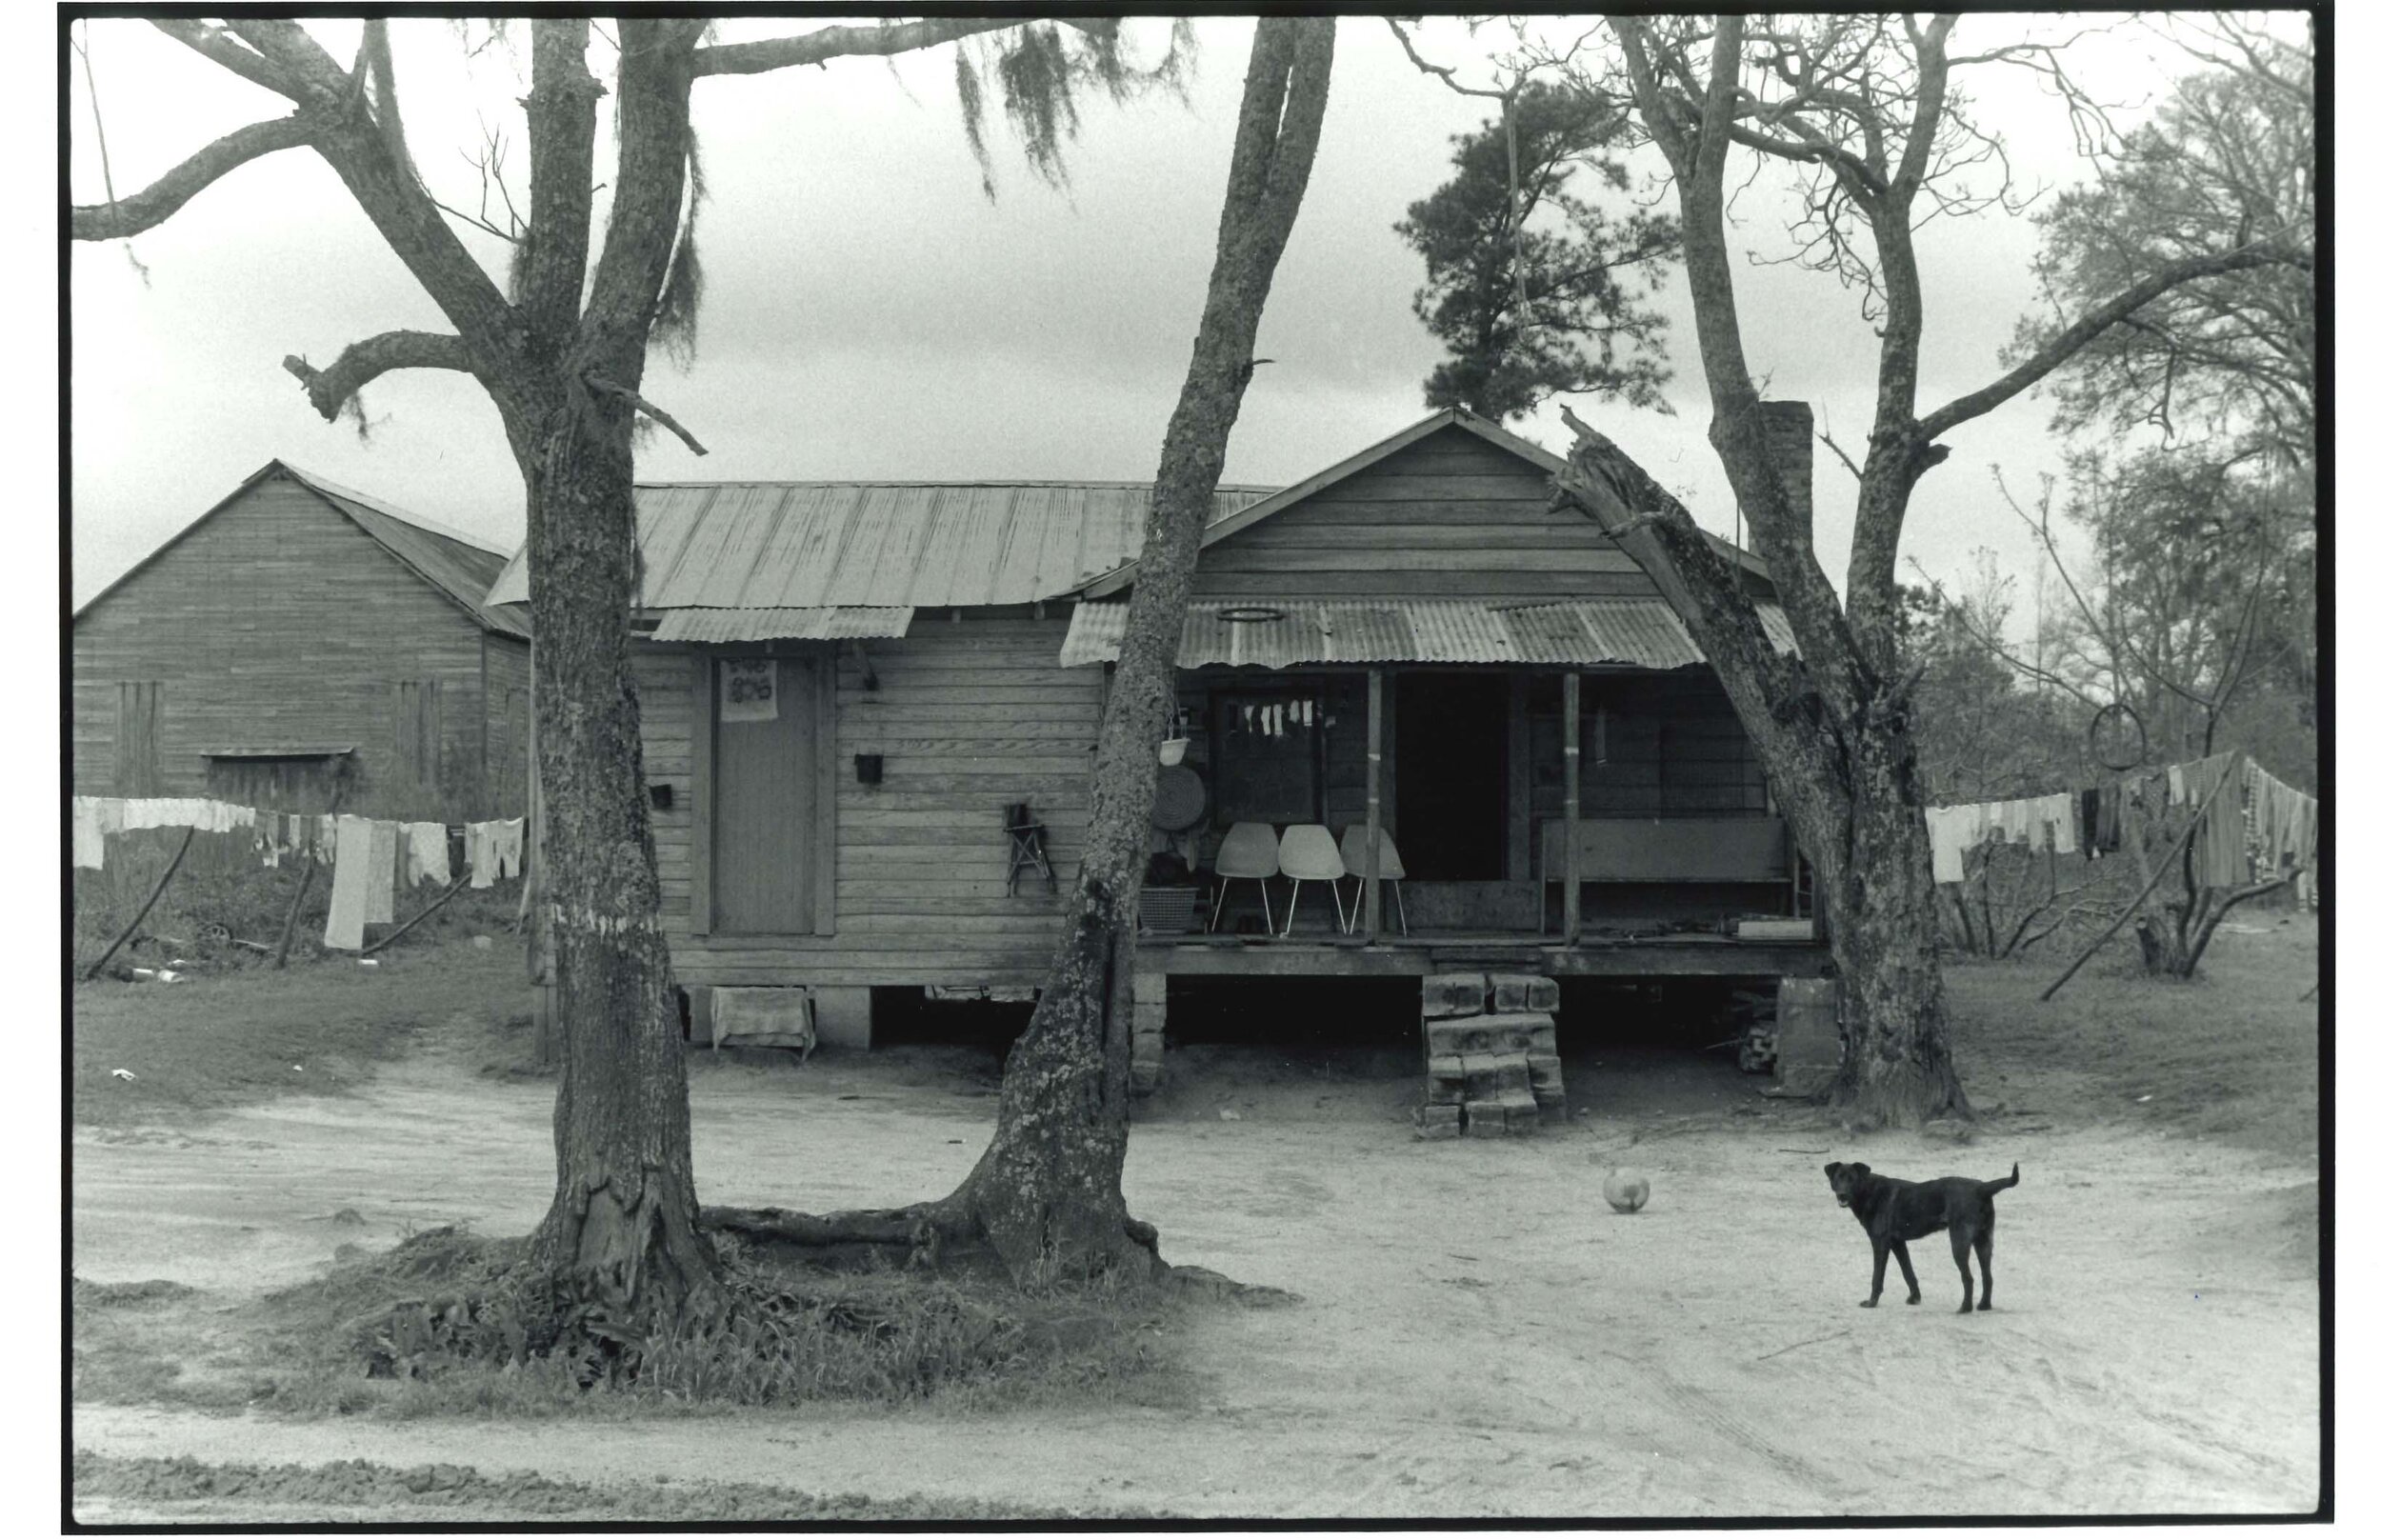   Shade Tobacco Farm Tenant House, Gadsden County, FL  Image: 1980/printed: 2020 Gelatin silver print 7 1/4 x 10 1/2 in. (image size)  The Do Good Fund, Inc., 2020-078 